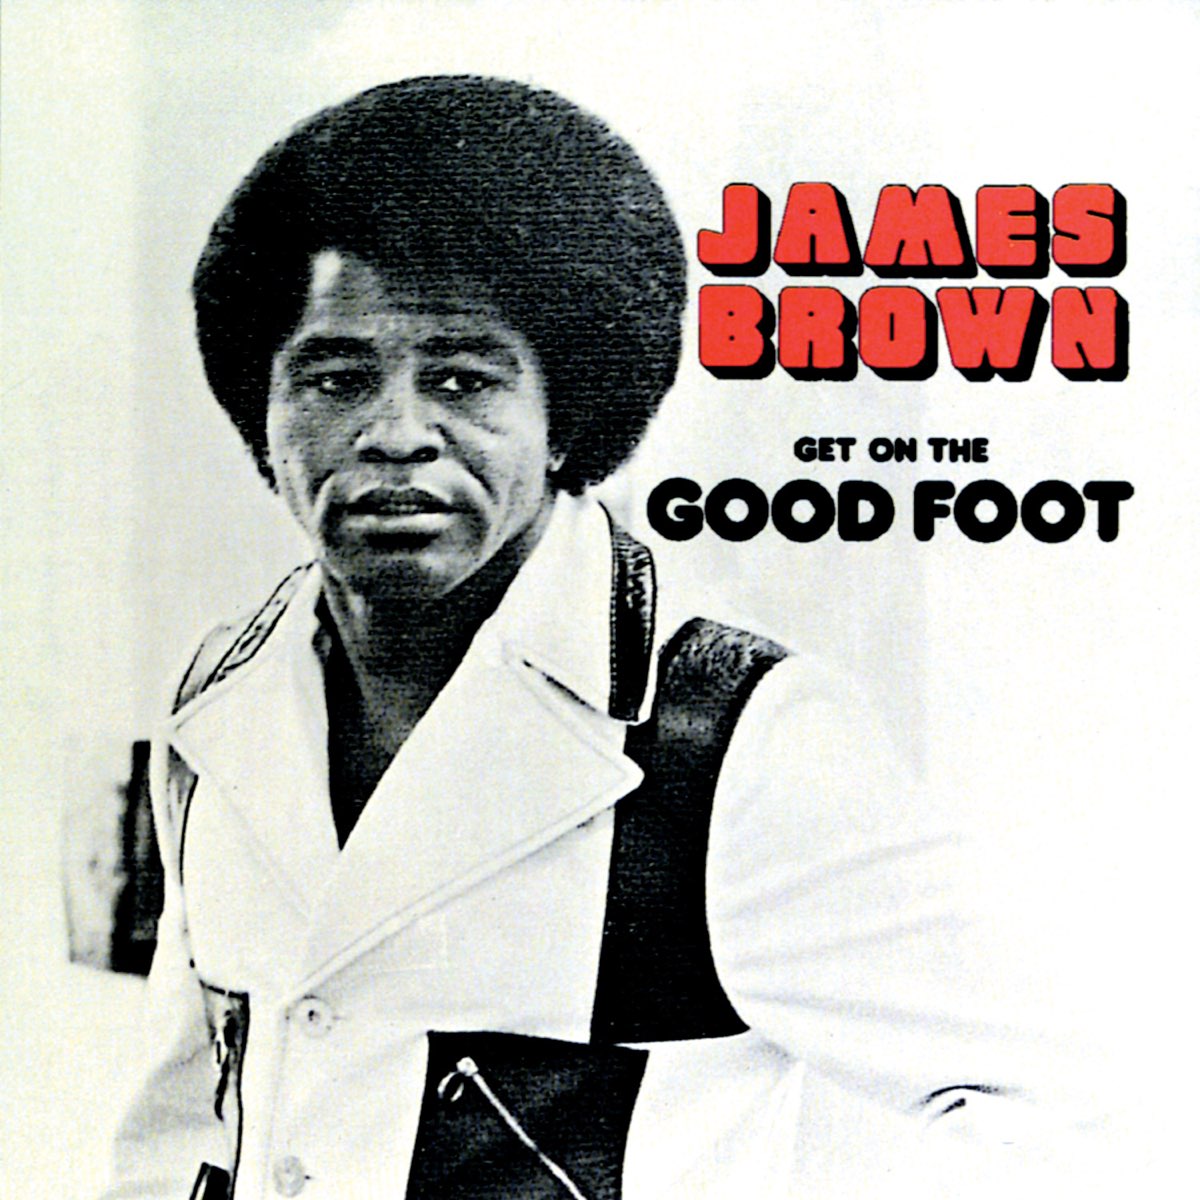 Get on the Good Foot - Album by James Brown - Apple Music